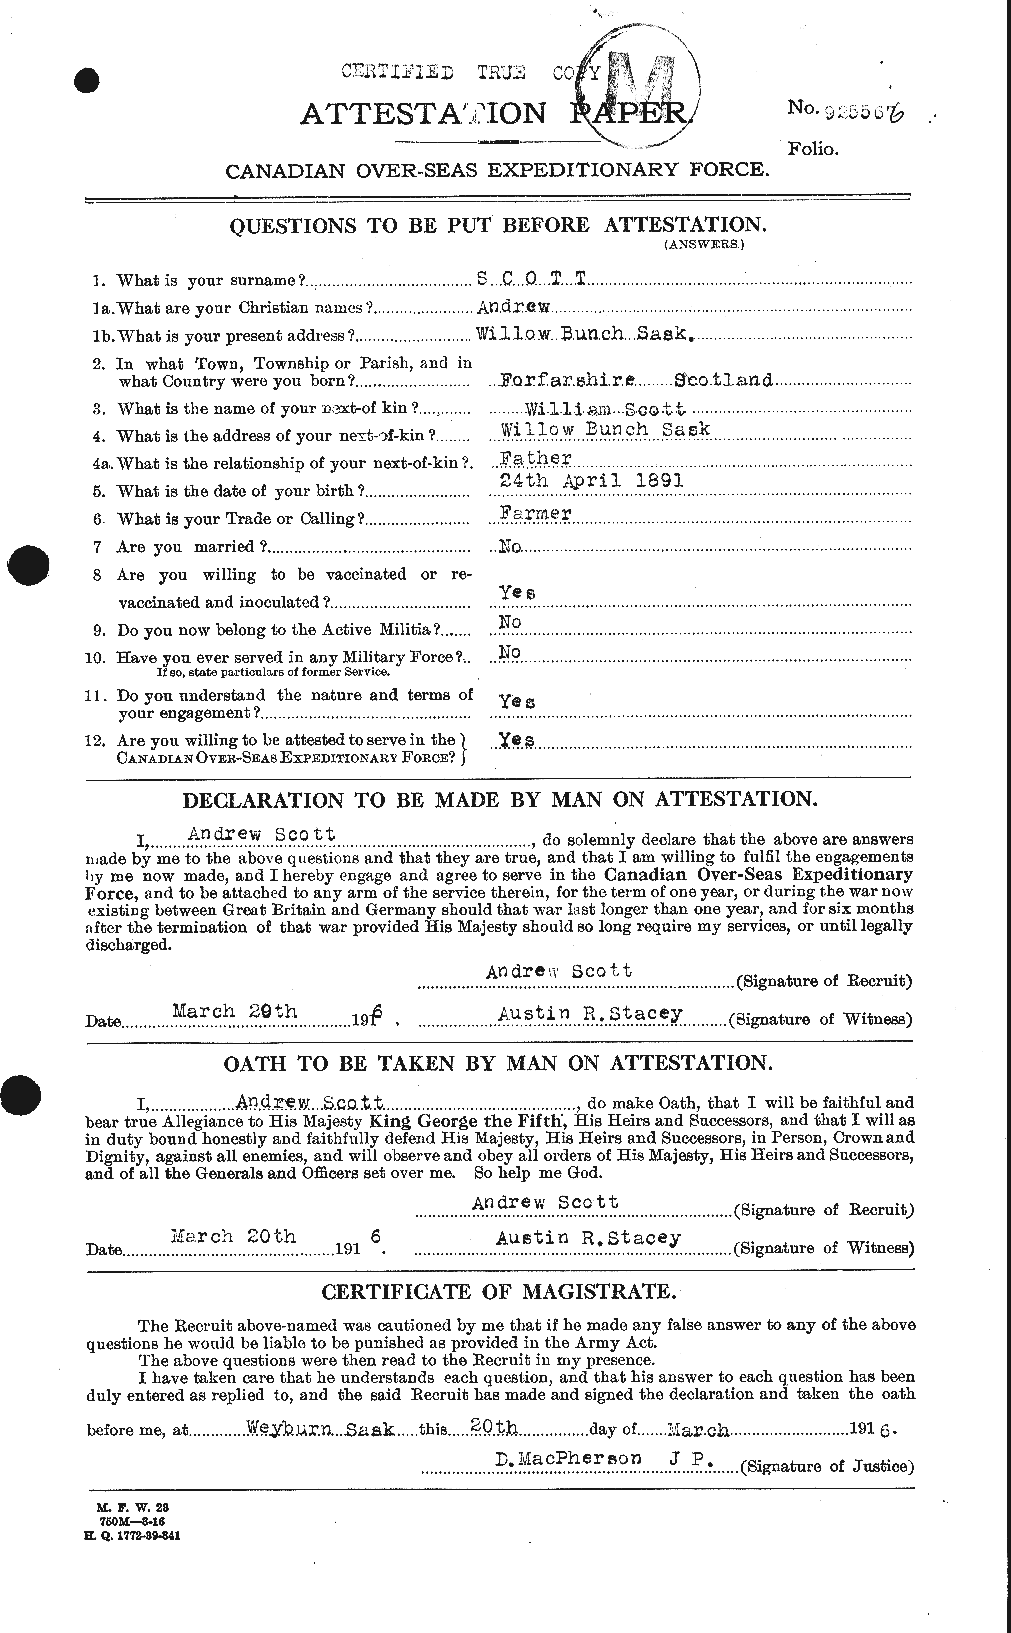 Personnel Records of the First World War - CEF 086447a